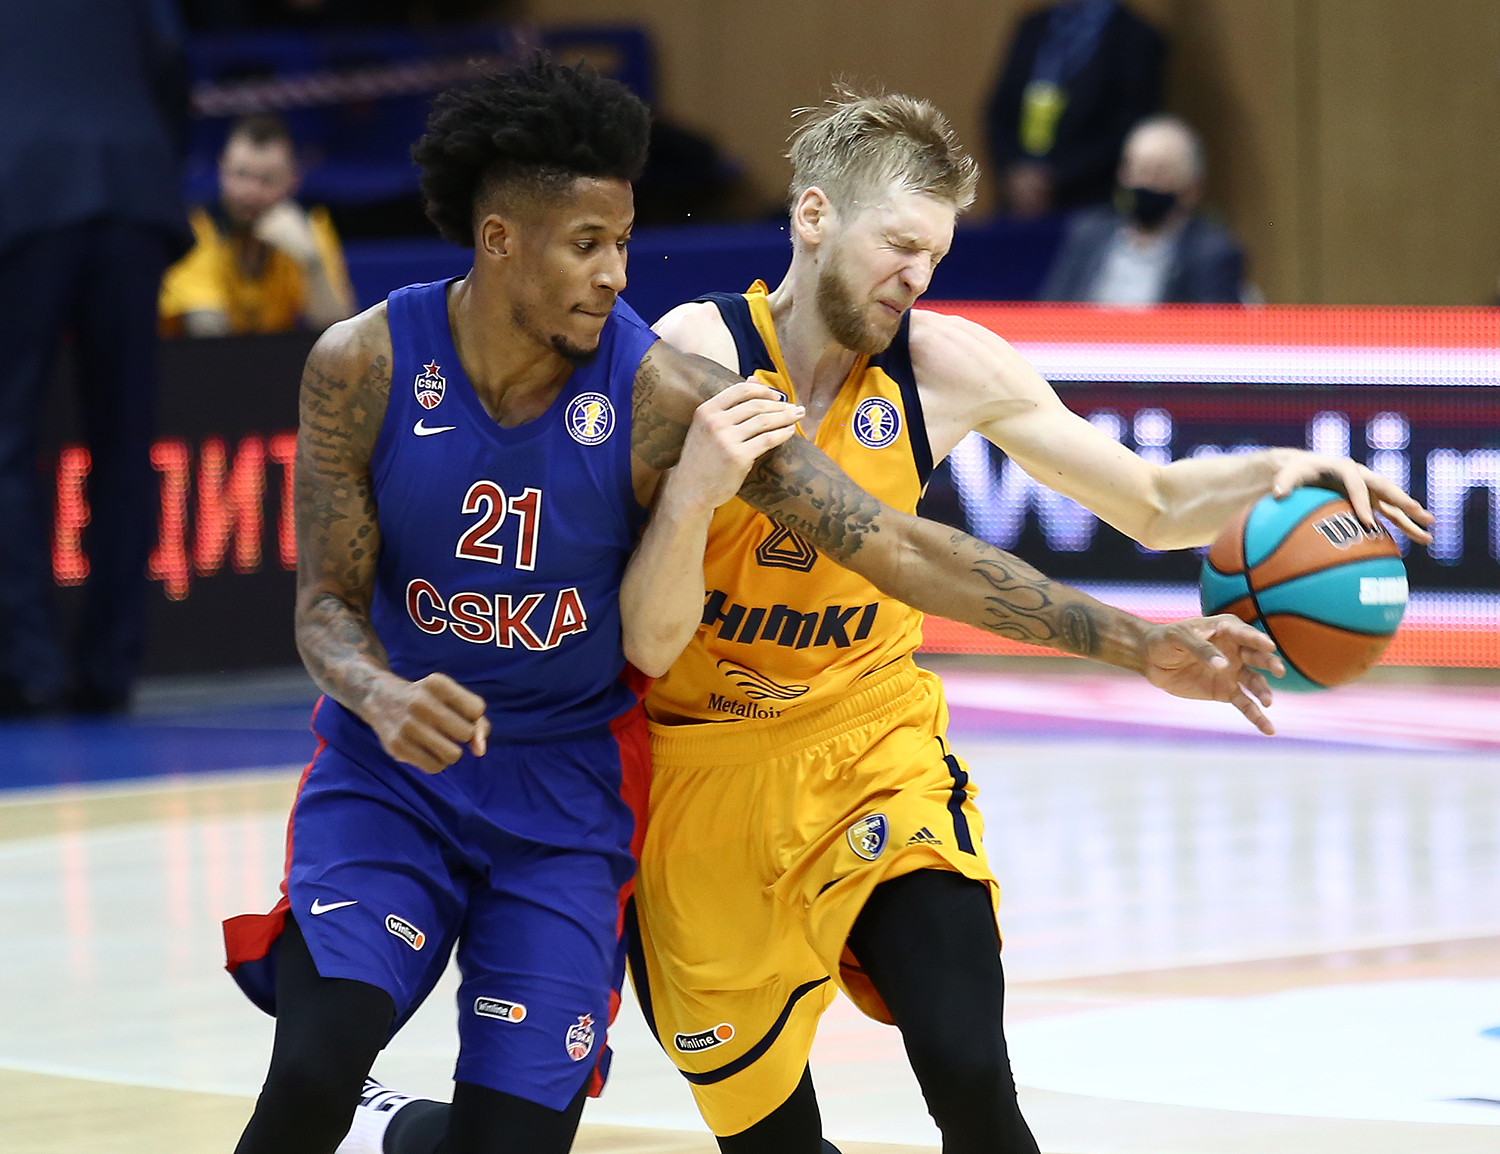 CSKA complicate Khimki situation, UNICS allow Kalev to score 49 points, Avtodor release head coach. Week in review